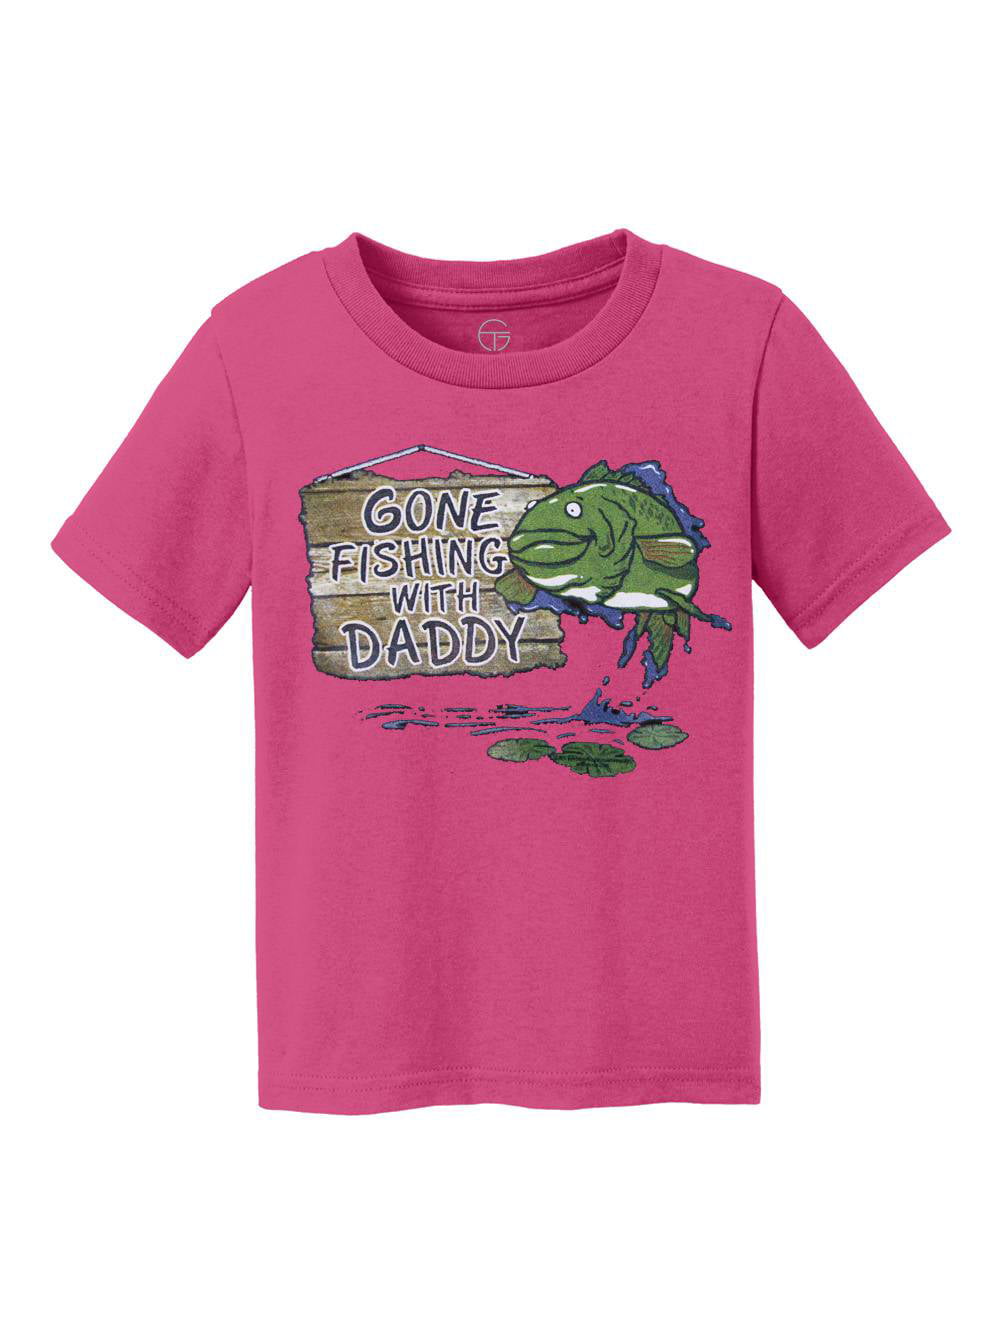 Gone Fishing With Daddy Kids Cotton T-Shirt - Navy - Small